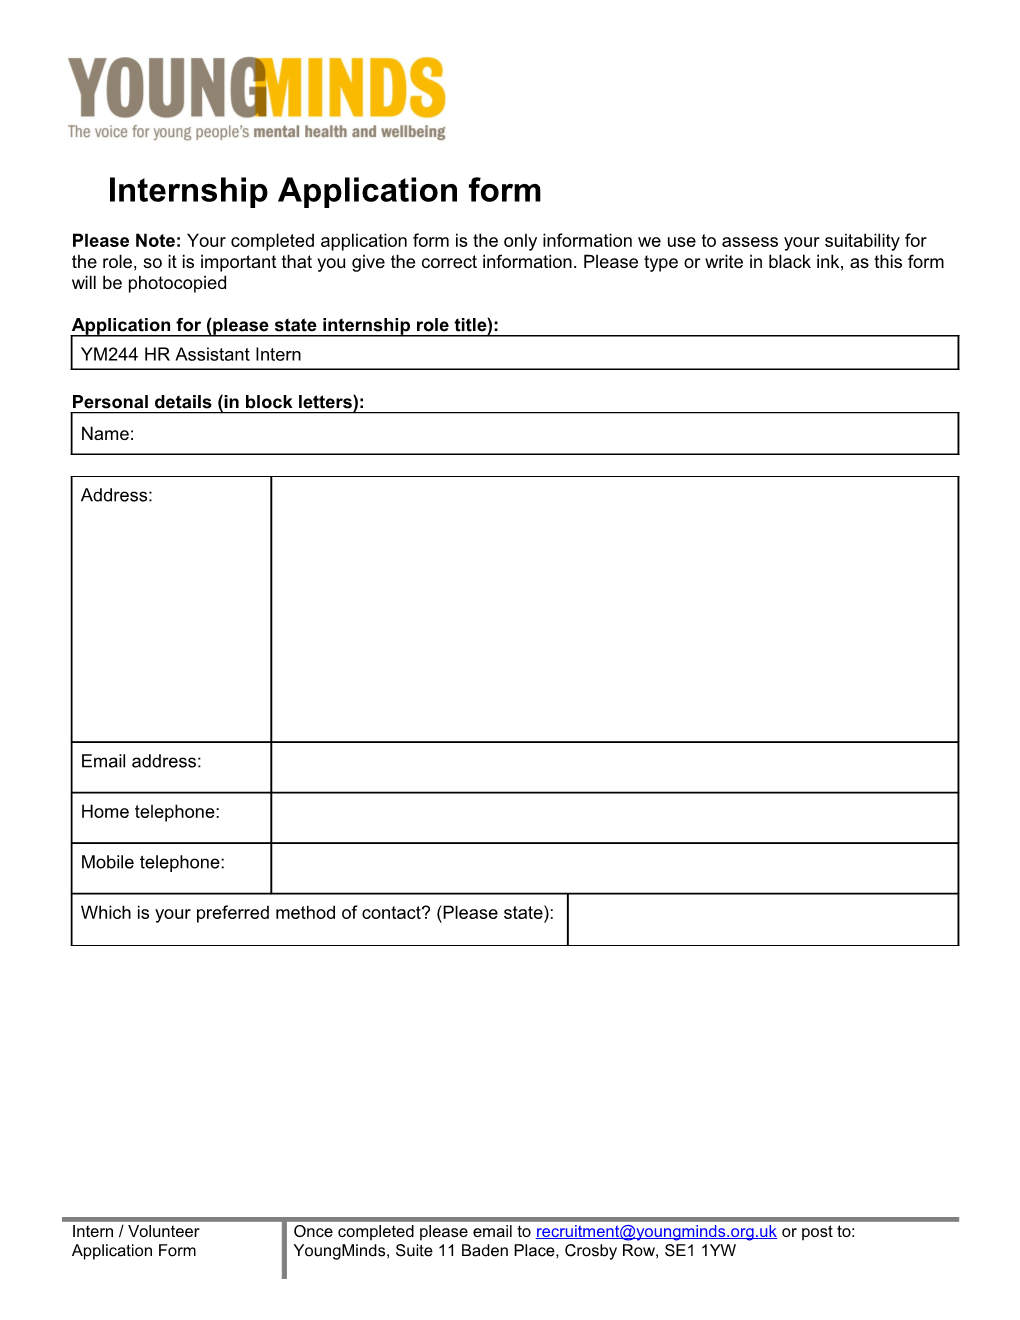 Application for (Please State Internshiprole Title)